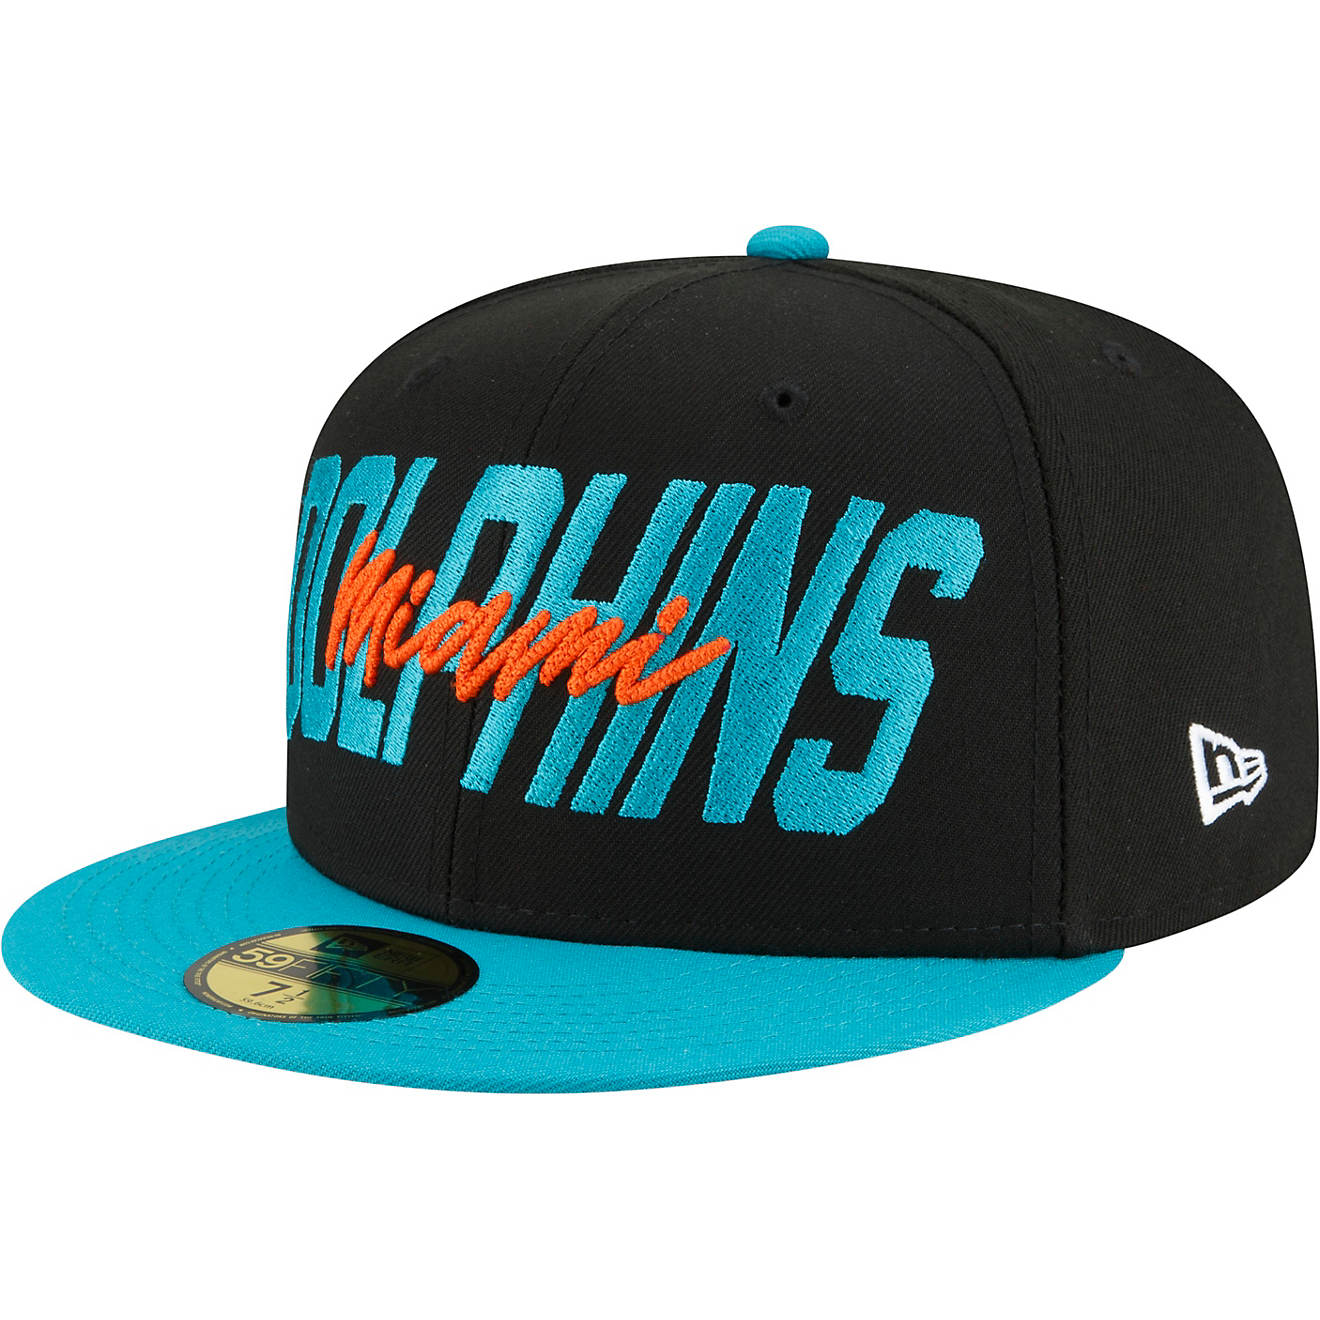 New Era Men's Miami Dolphins NFL Draft 22 59FIFTY Cap                                                                            - view number 1